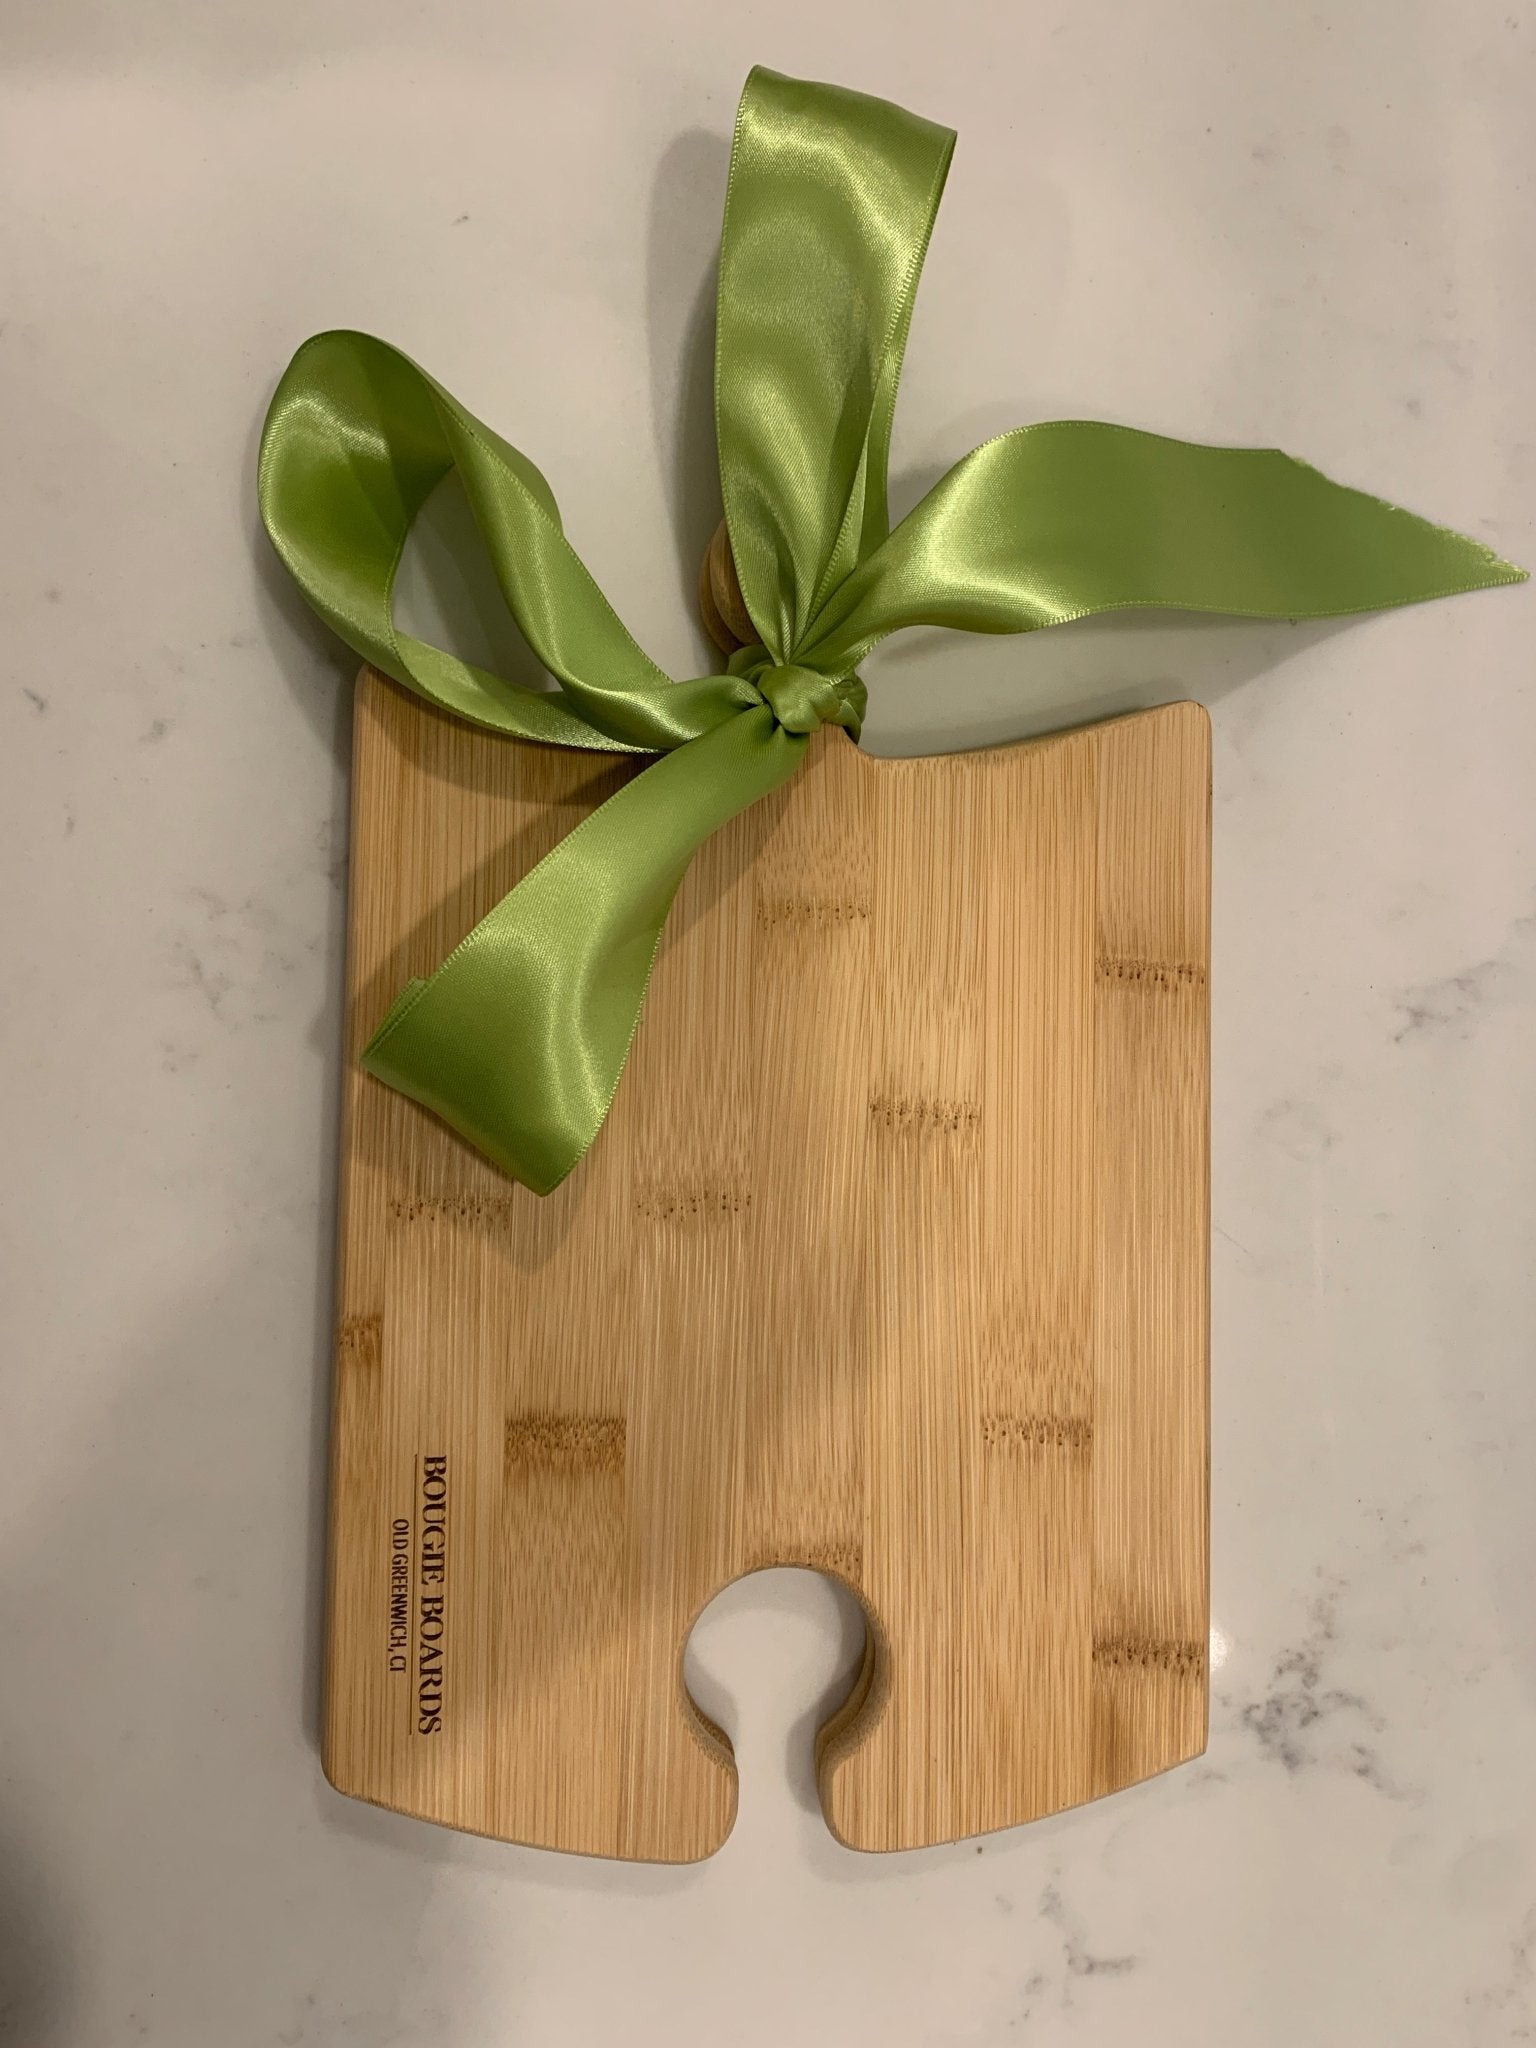 Set of Puzzle Piece Charcuterie Boards, Connect them to each other or use hole to hold your glass of wine!